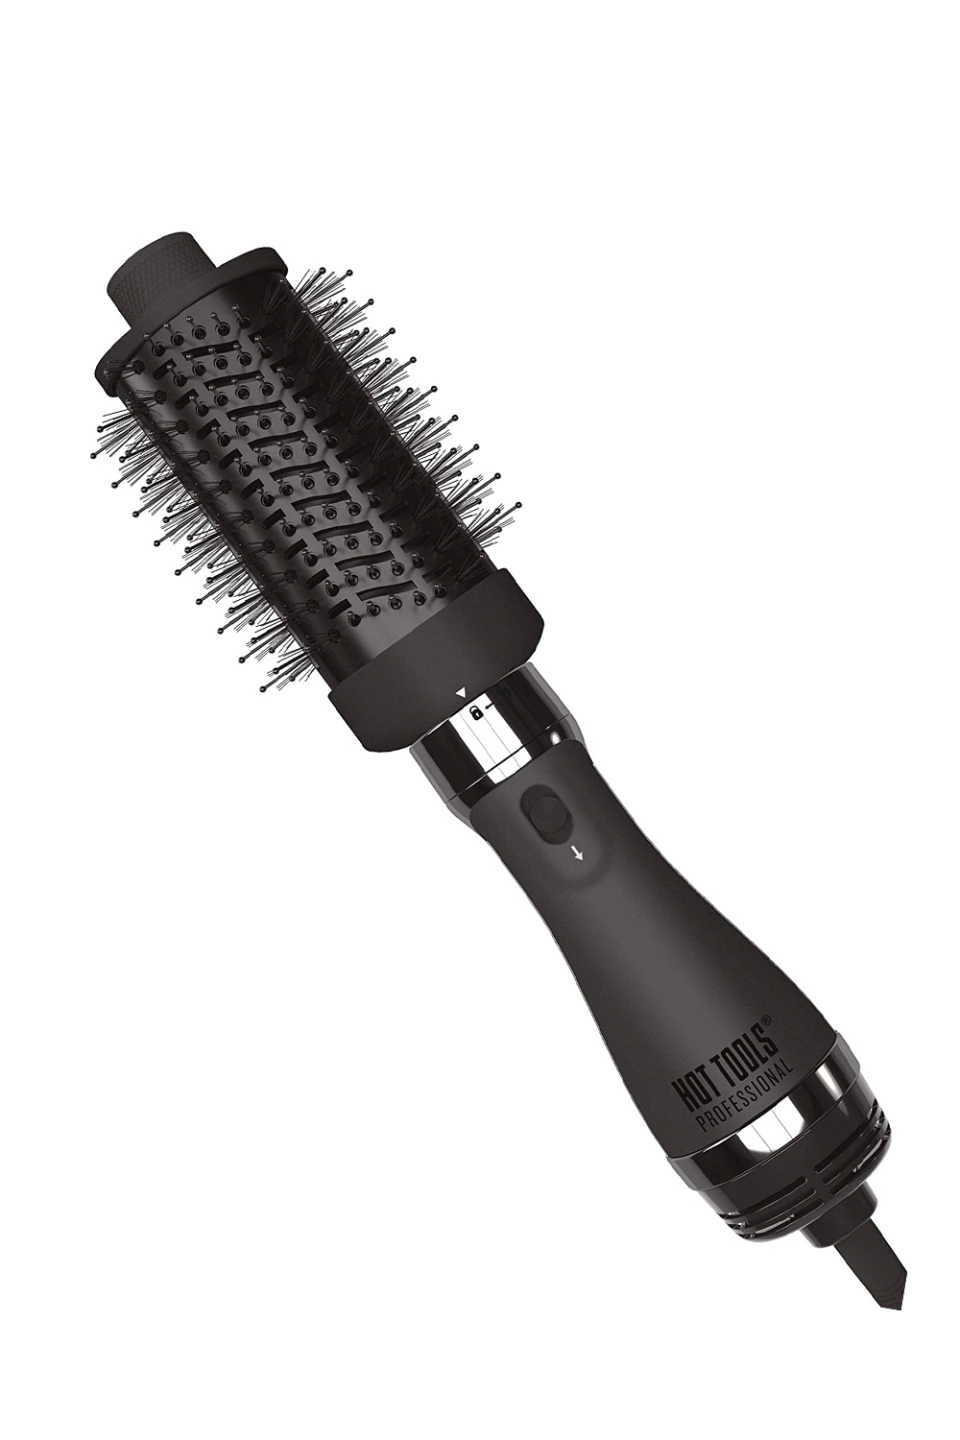 14) Hot Tools Professional Black Gold One-Step Detachable Blowout